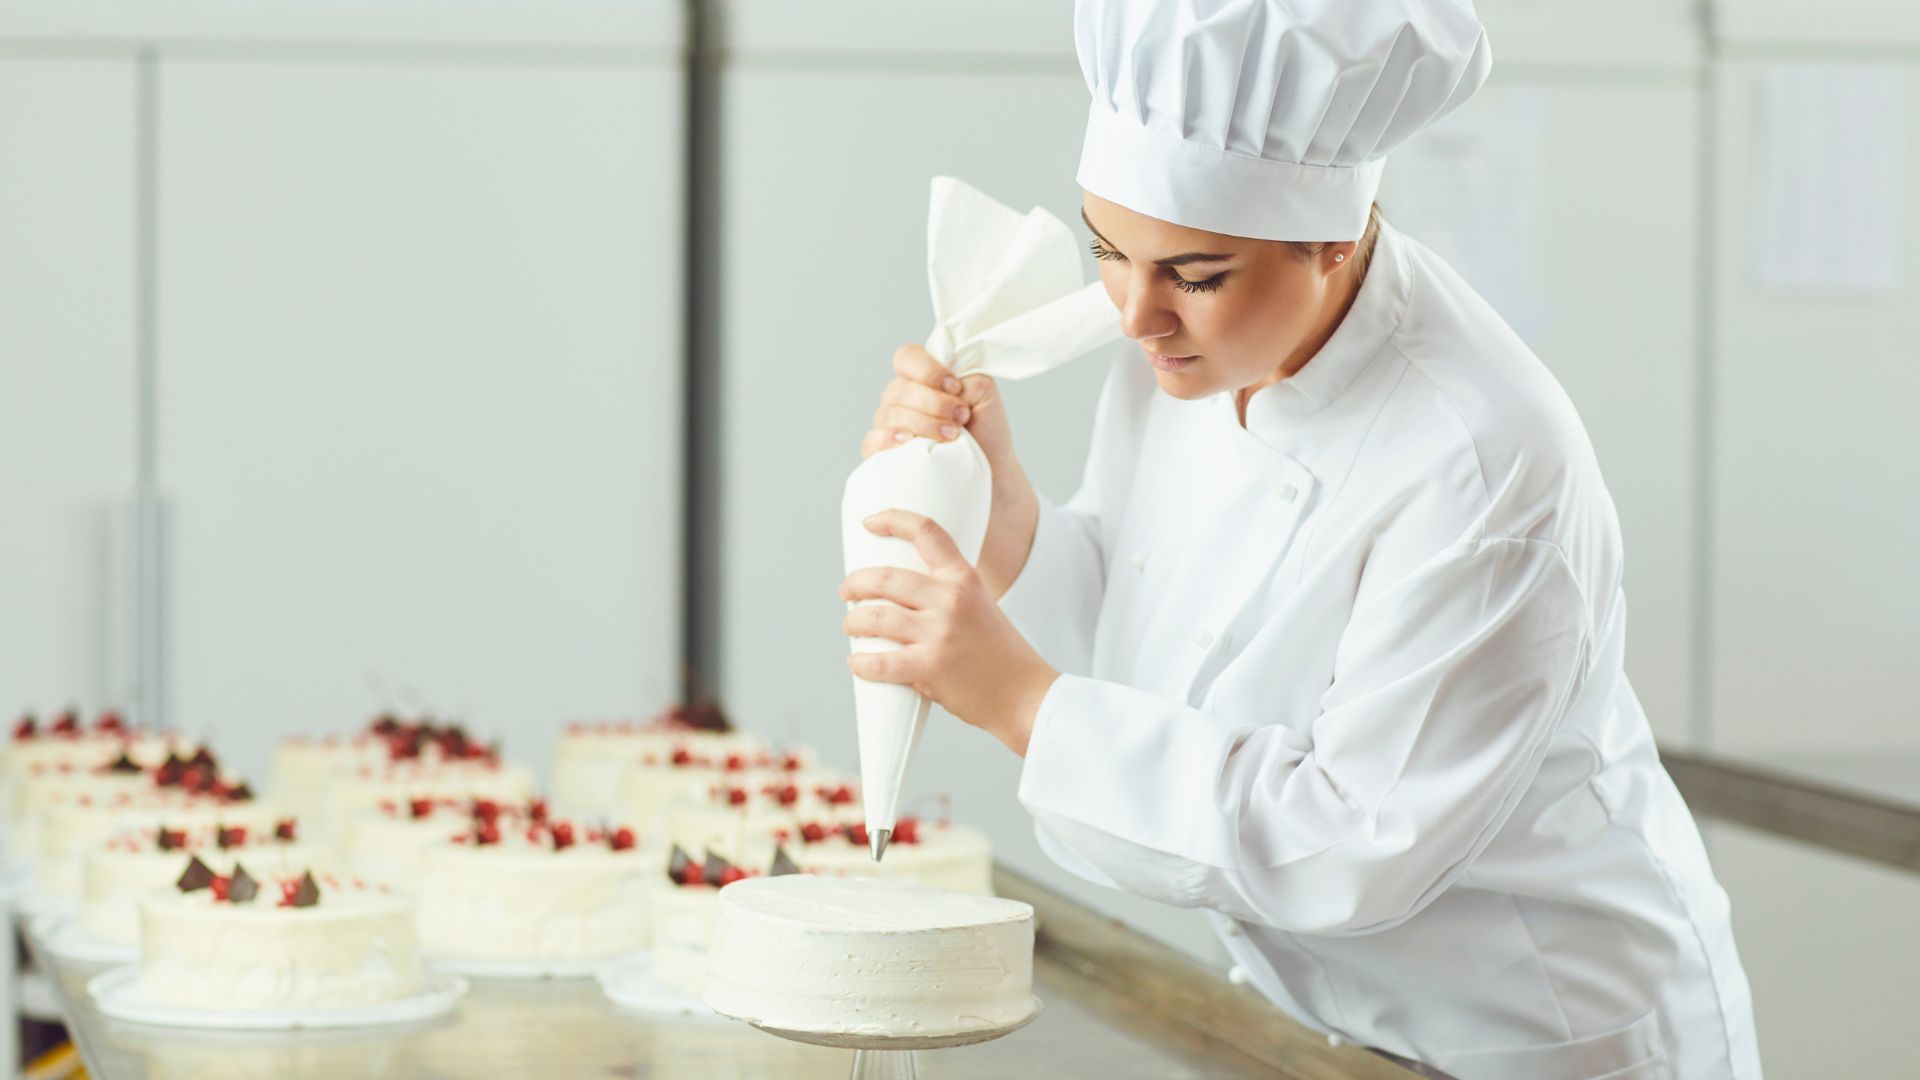 Pastry Chef Jobs, Pastry Chef Jobs Wexford